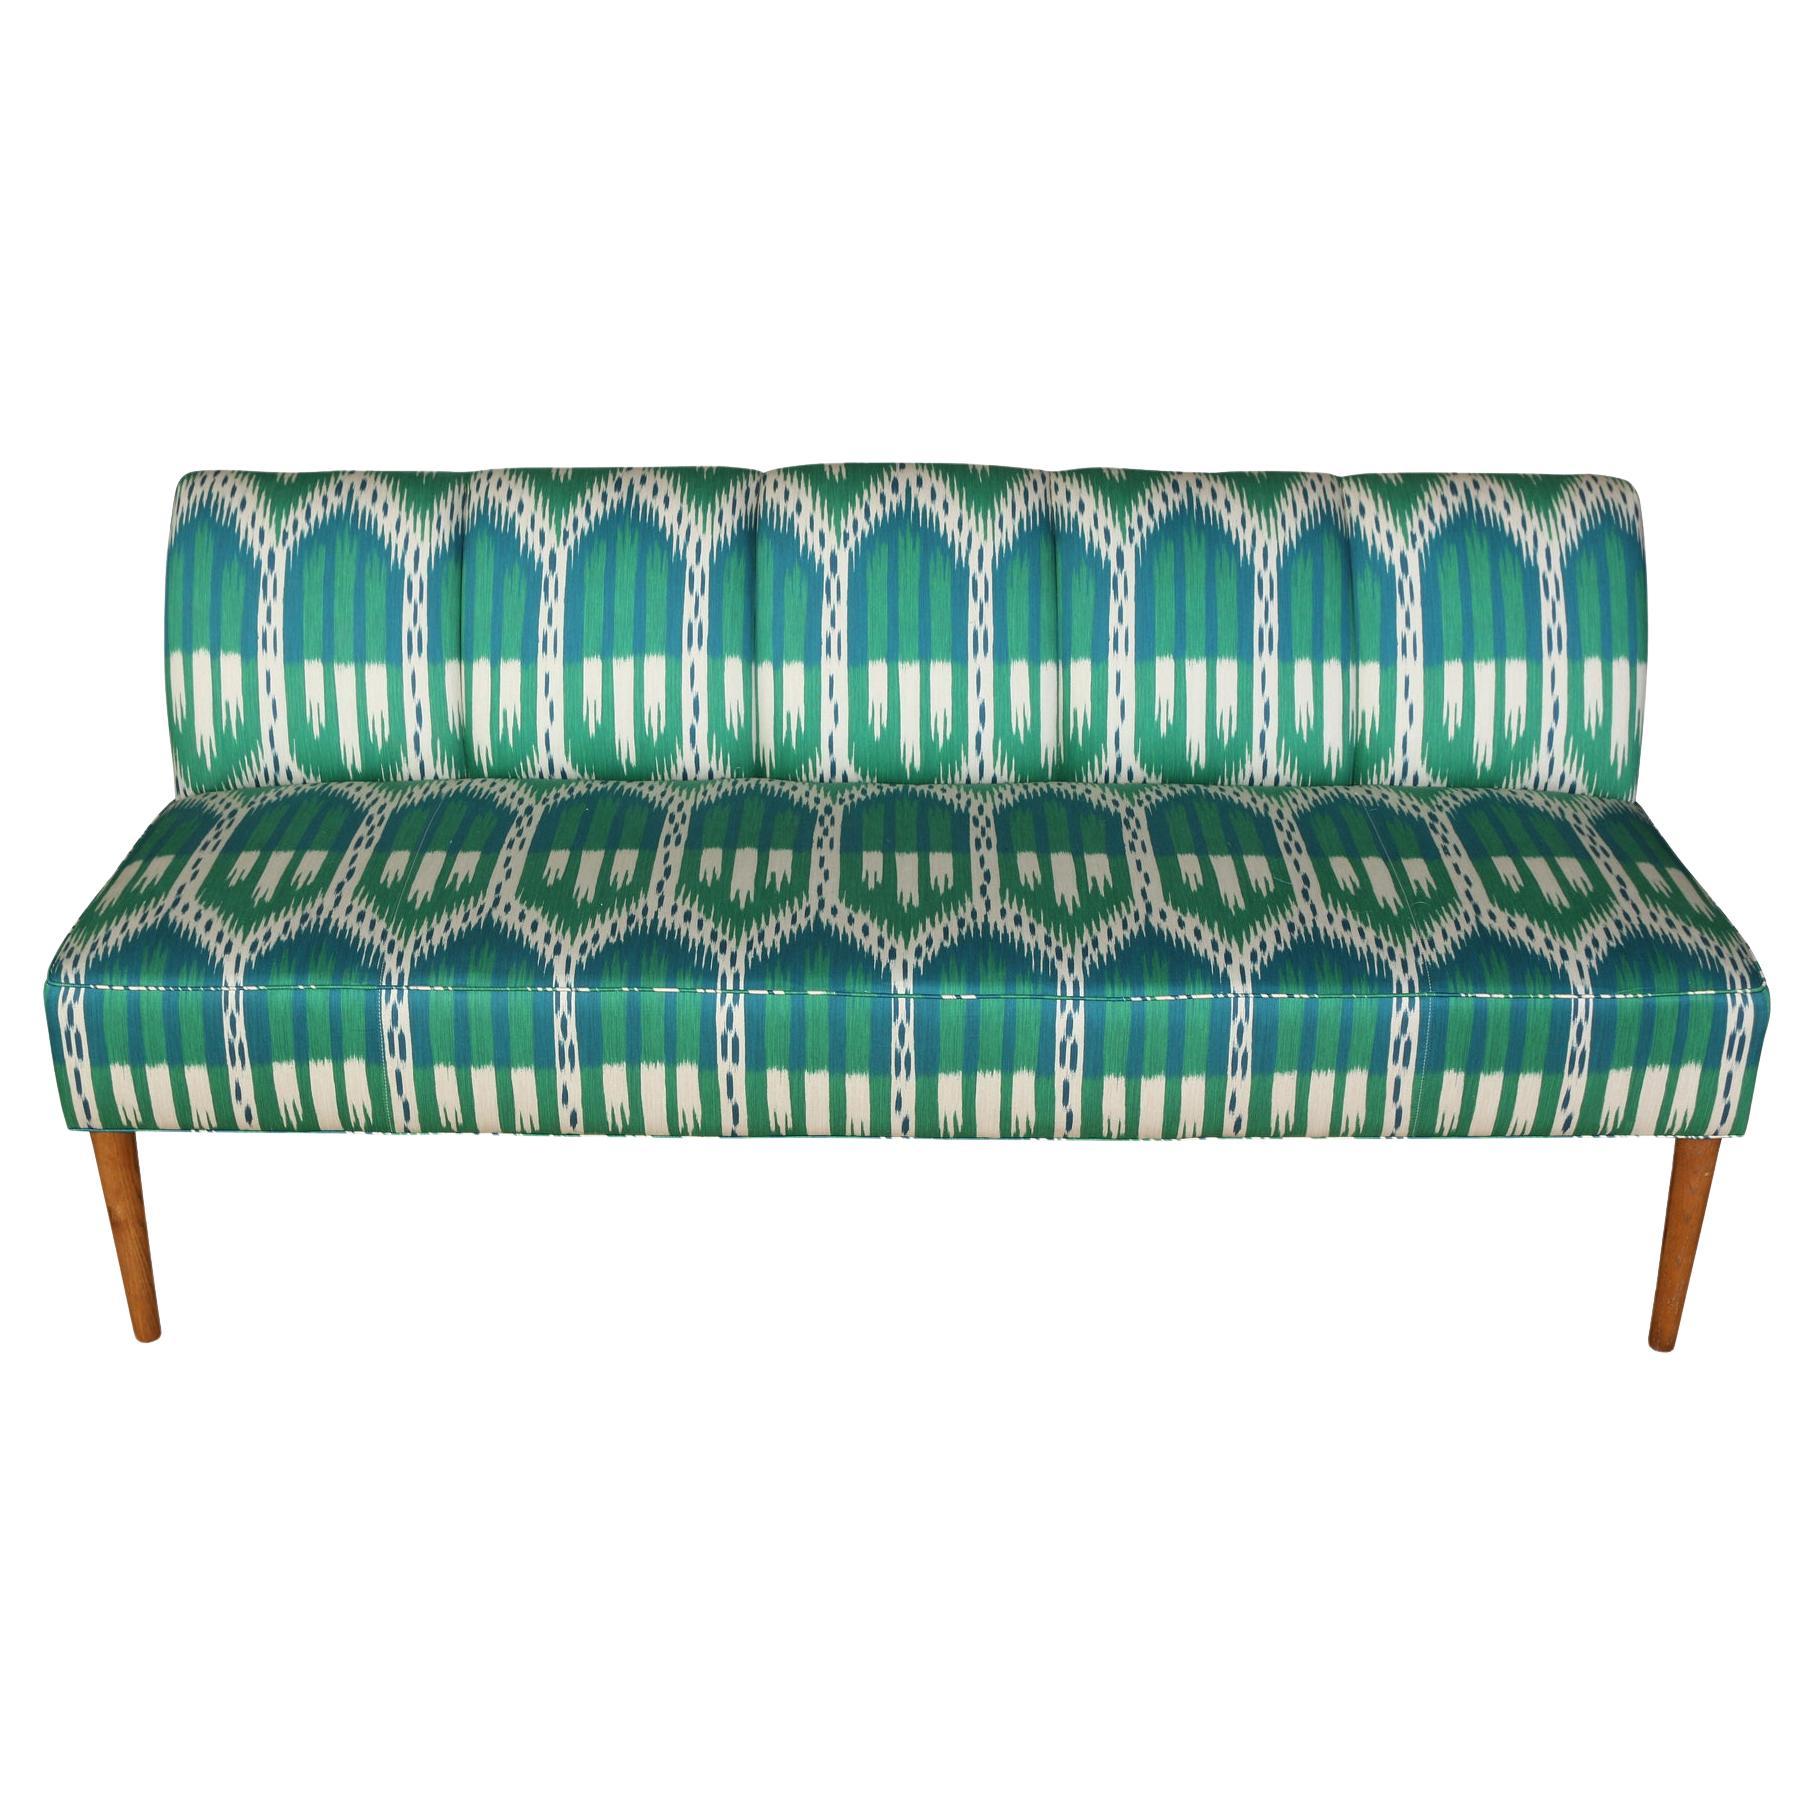 Teal and Turquoise Ikat Banquette For Sale